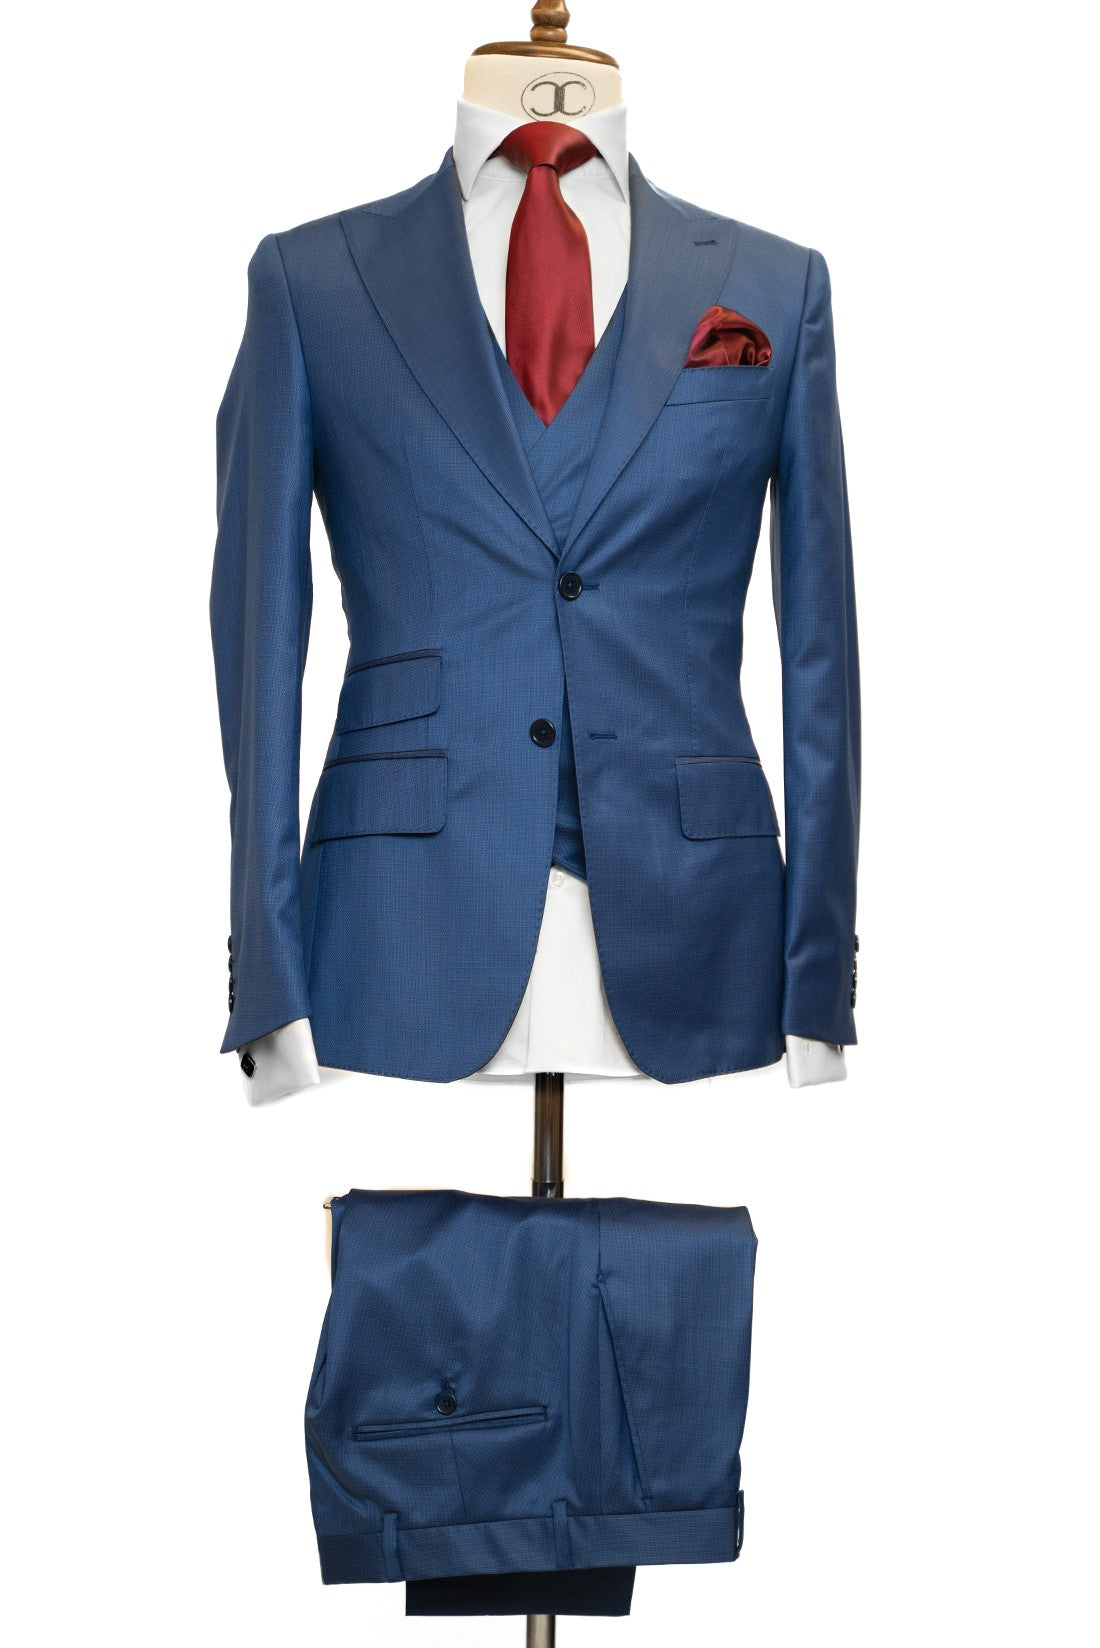 Lanificio Mario Filafil - Dull blue 3-piece slim fit suit with double breasted V vest